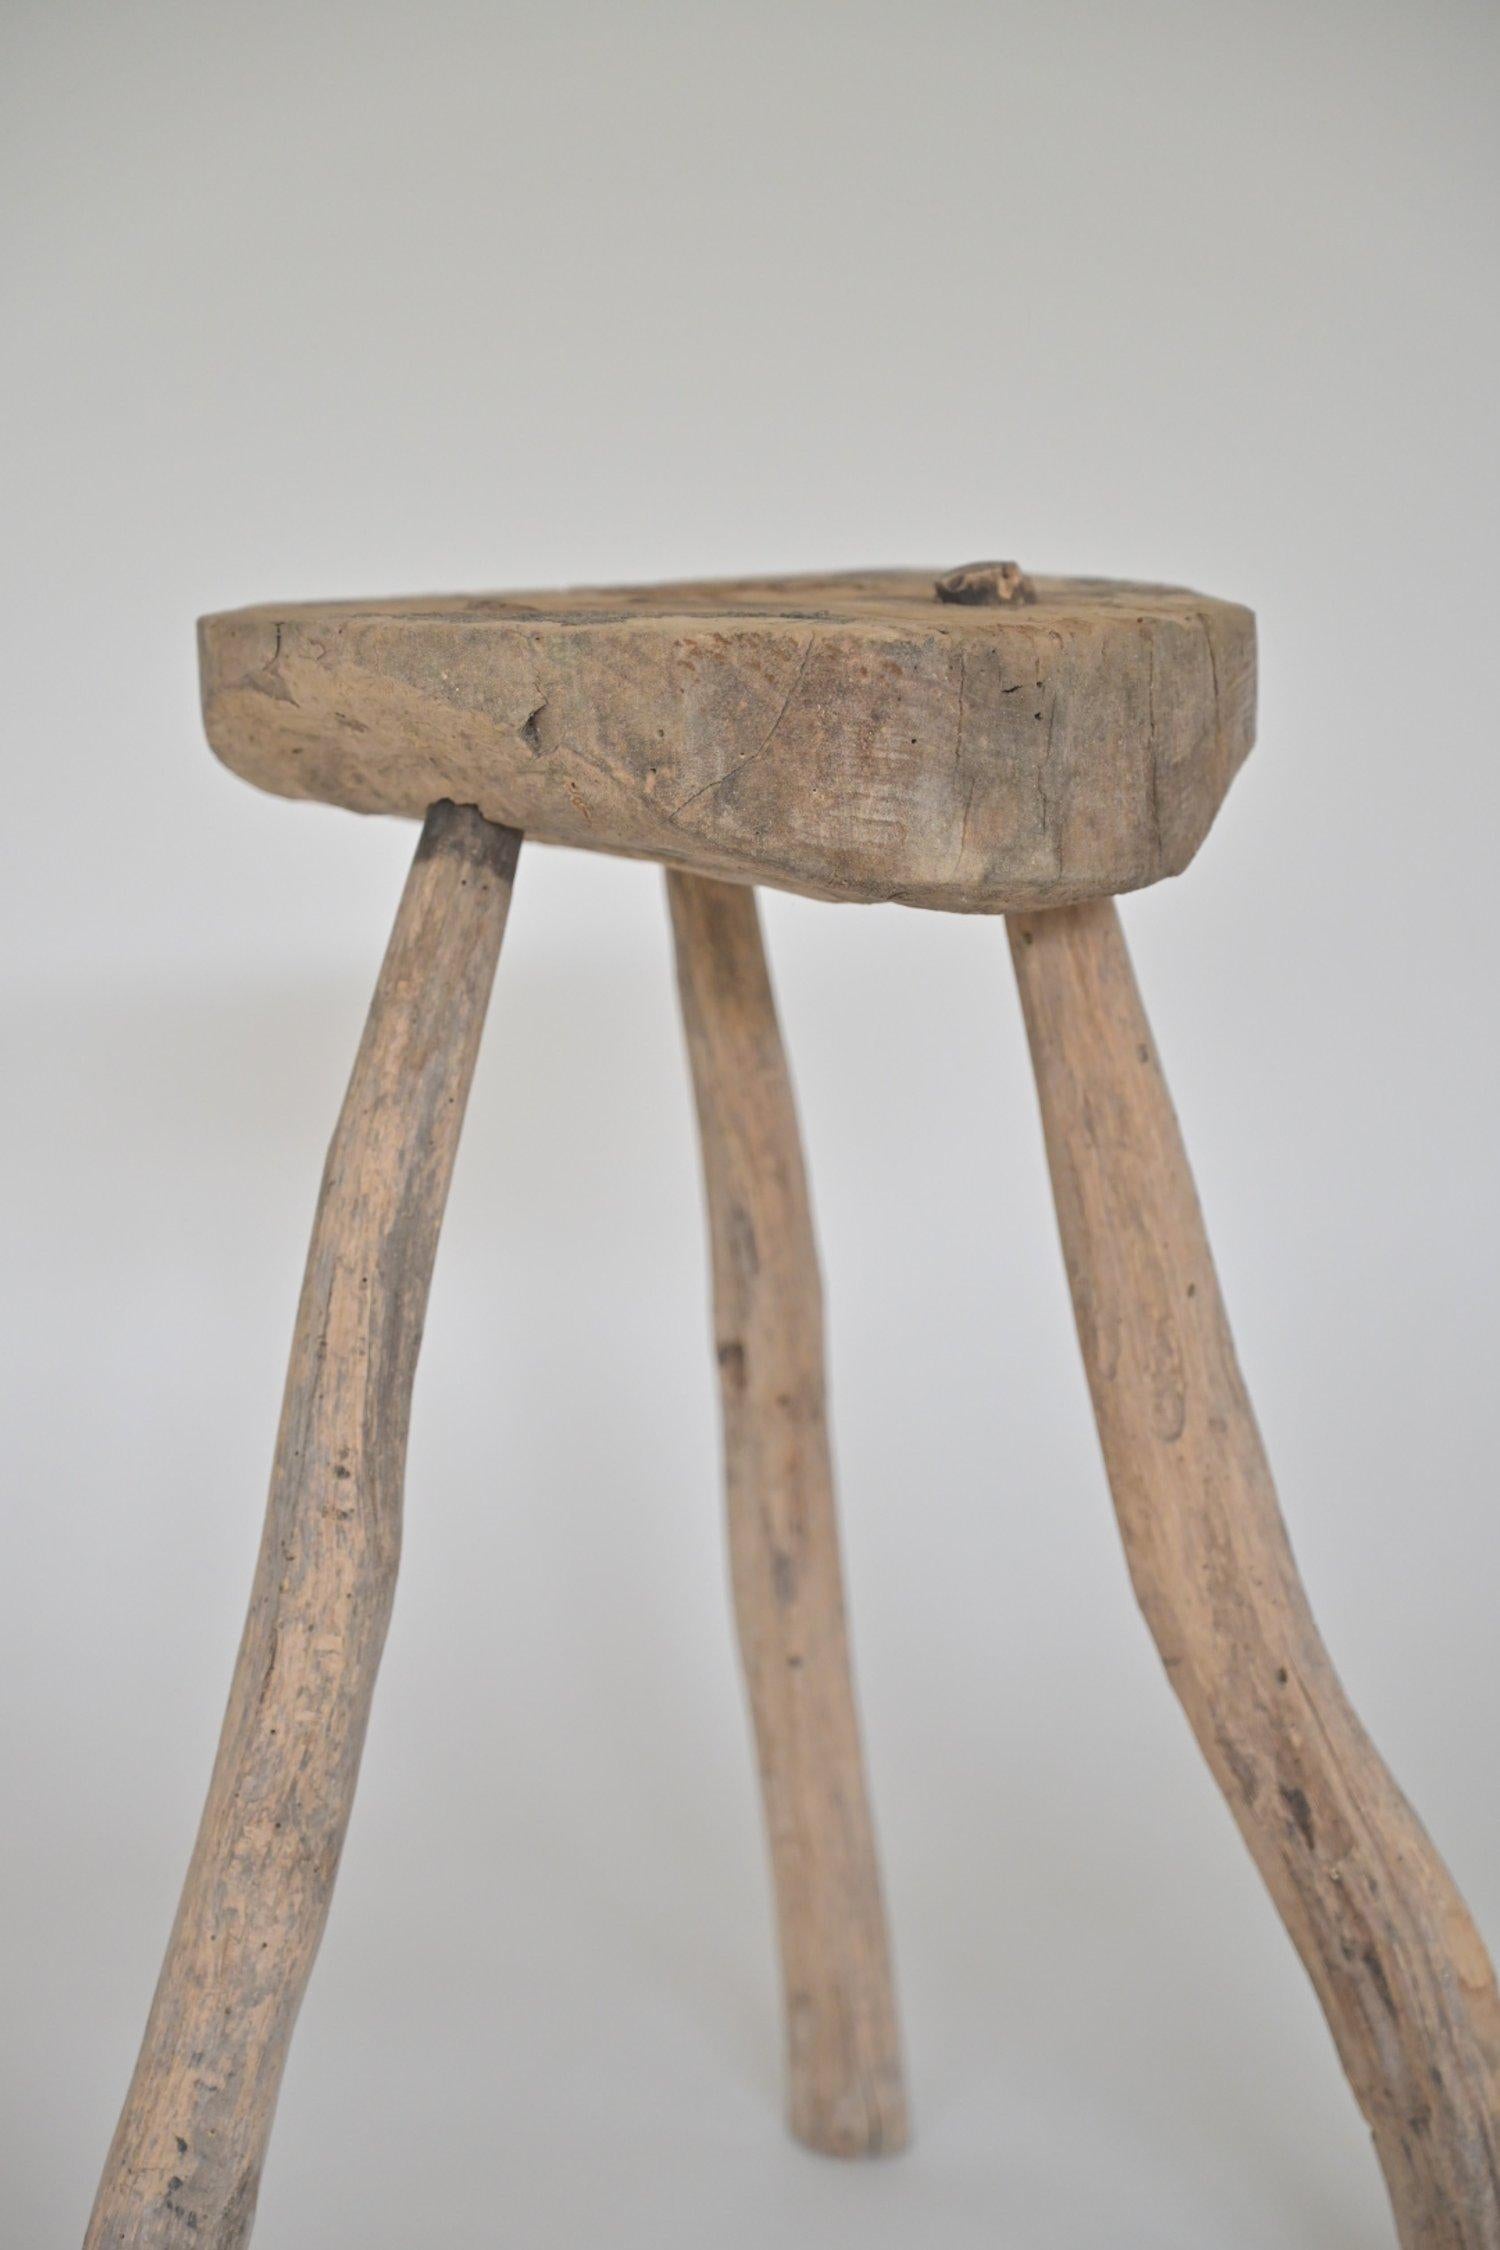 Wood Brutalist wooden side table or stool For Sale